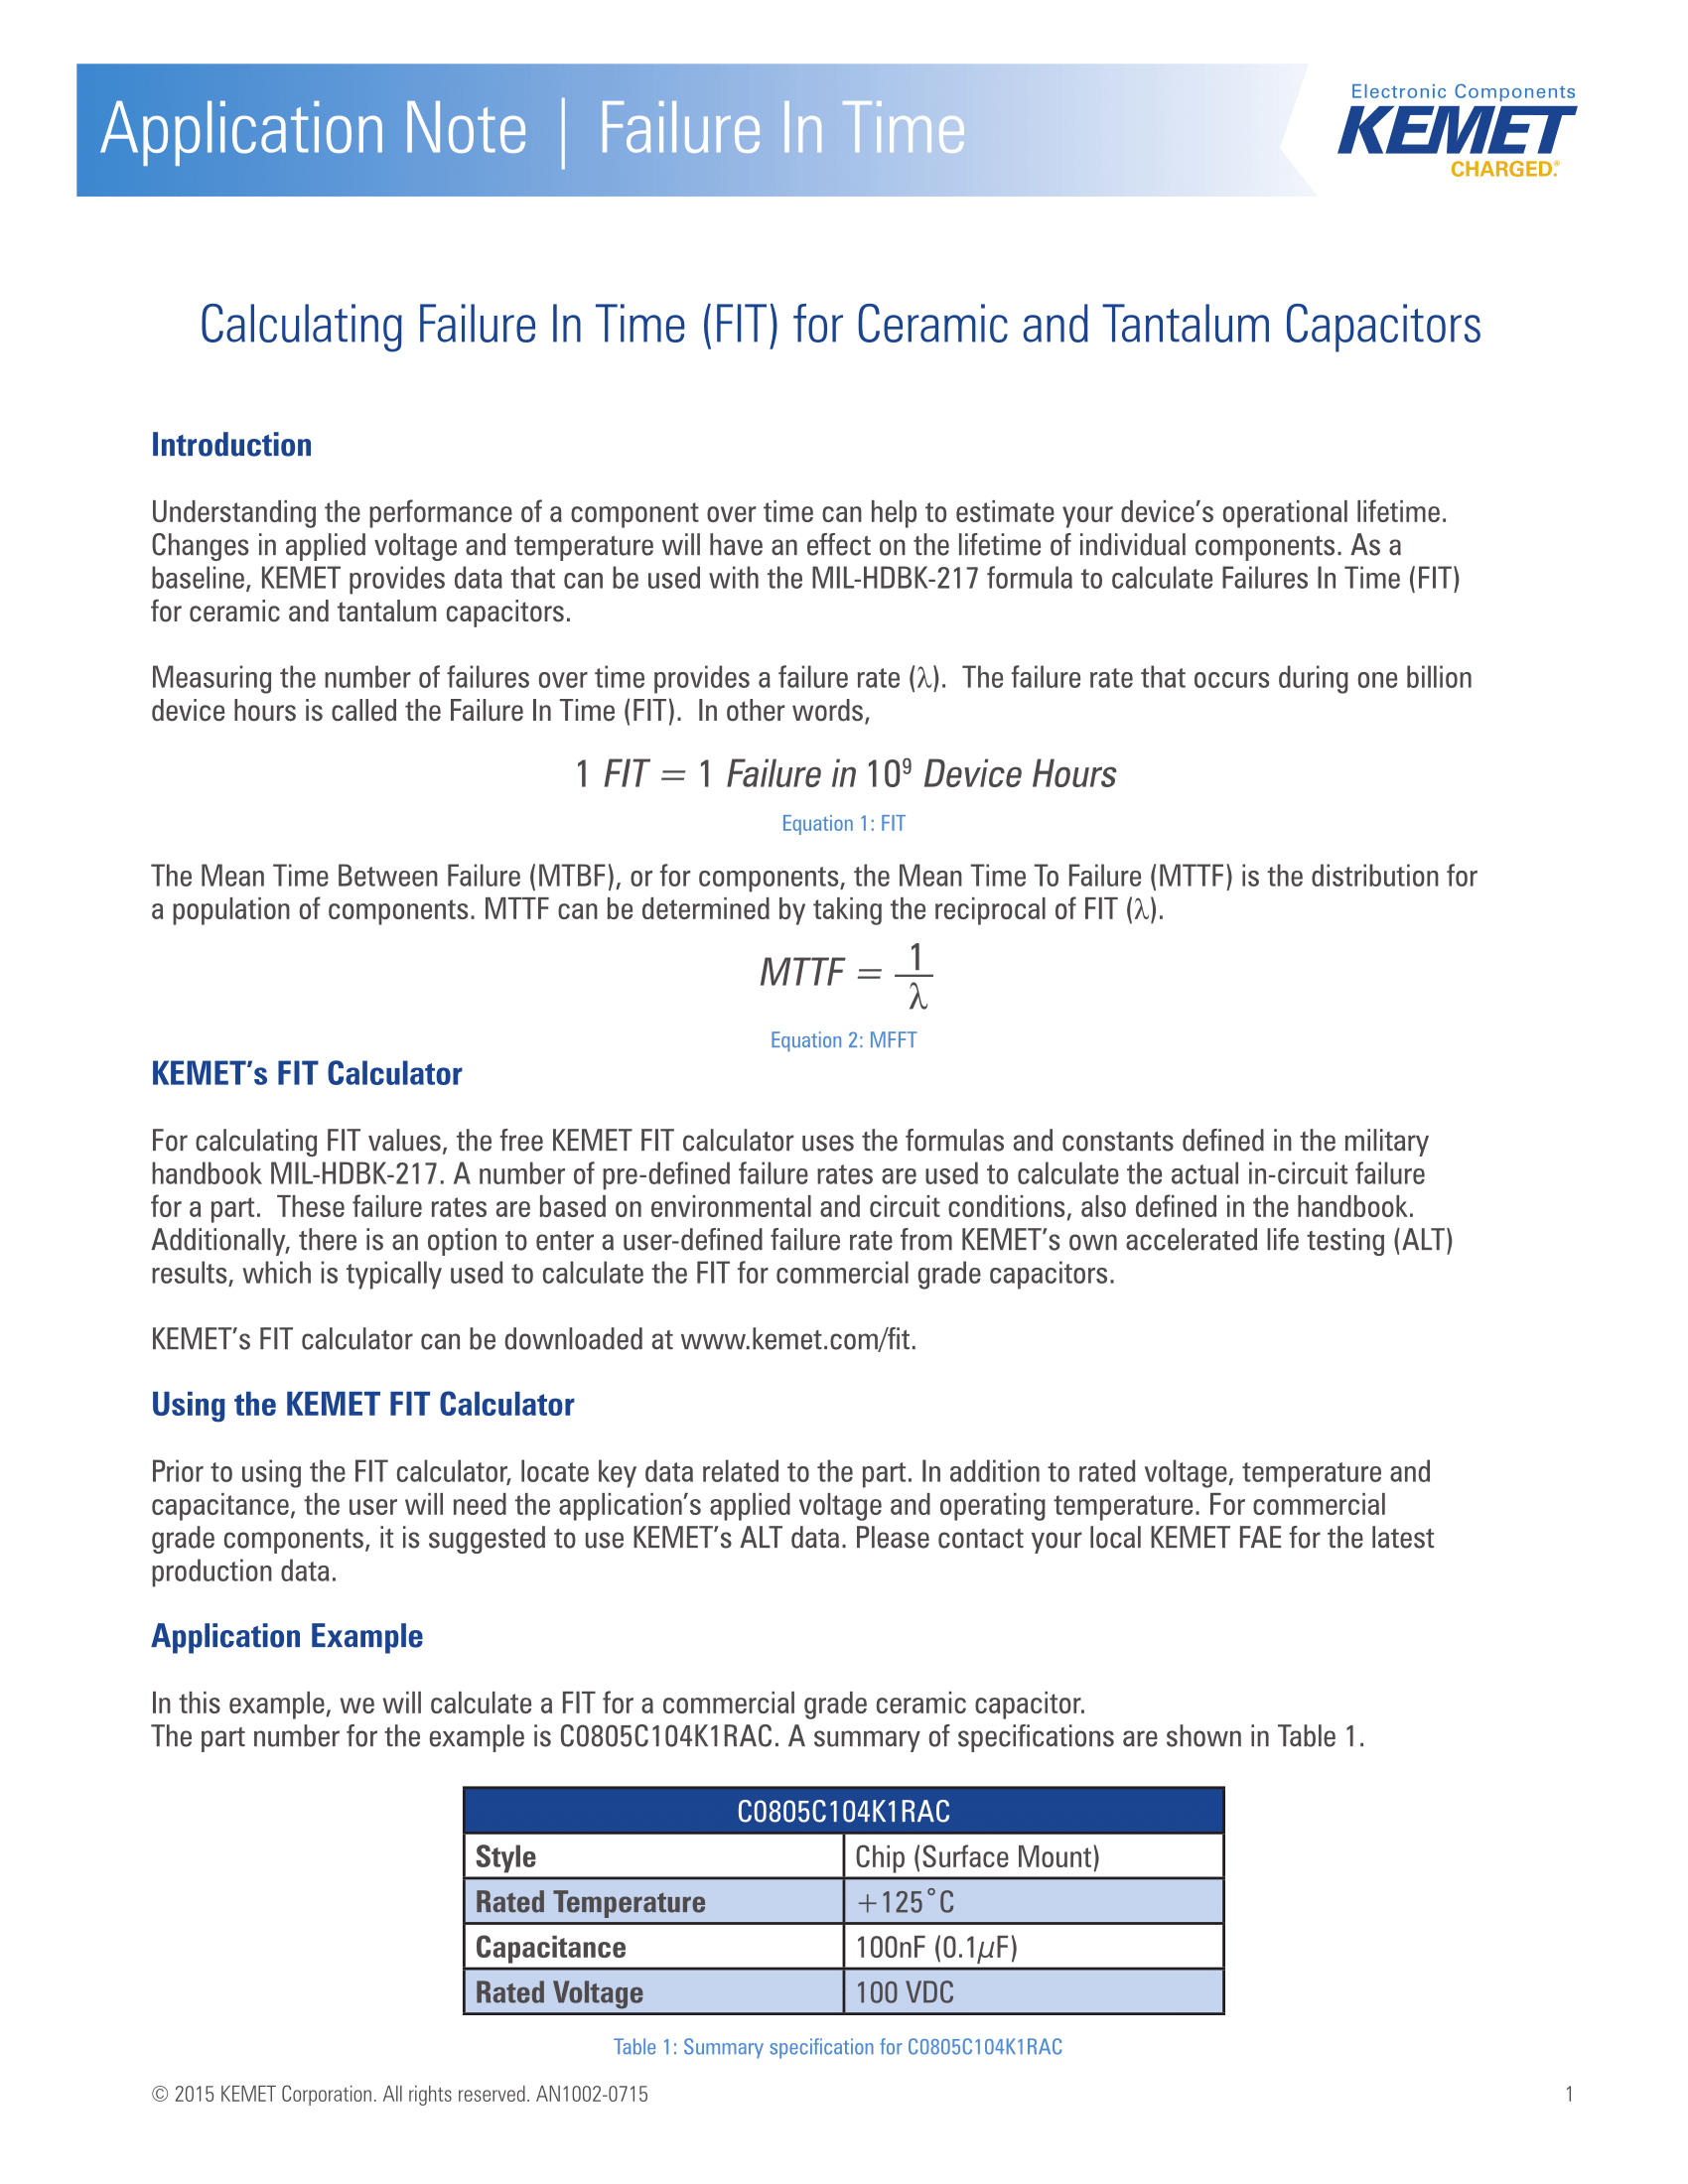 Mtbf Calculation Spreadsheet Intended For Knowledge » Calculating Failure In Time Fit Rate For Kemet